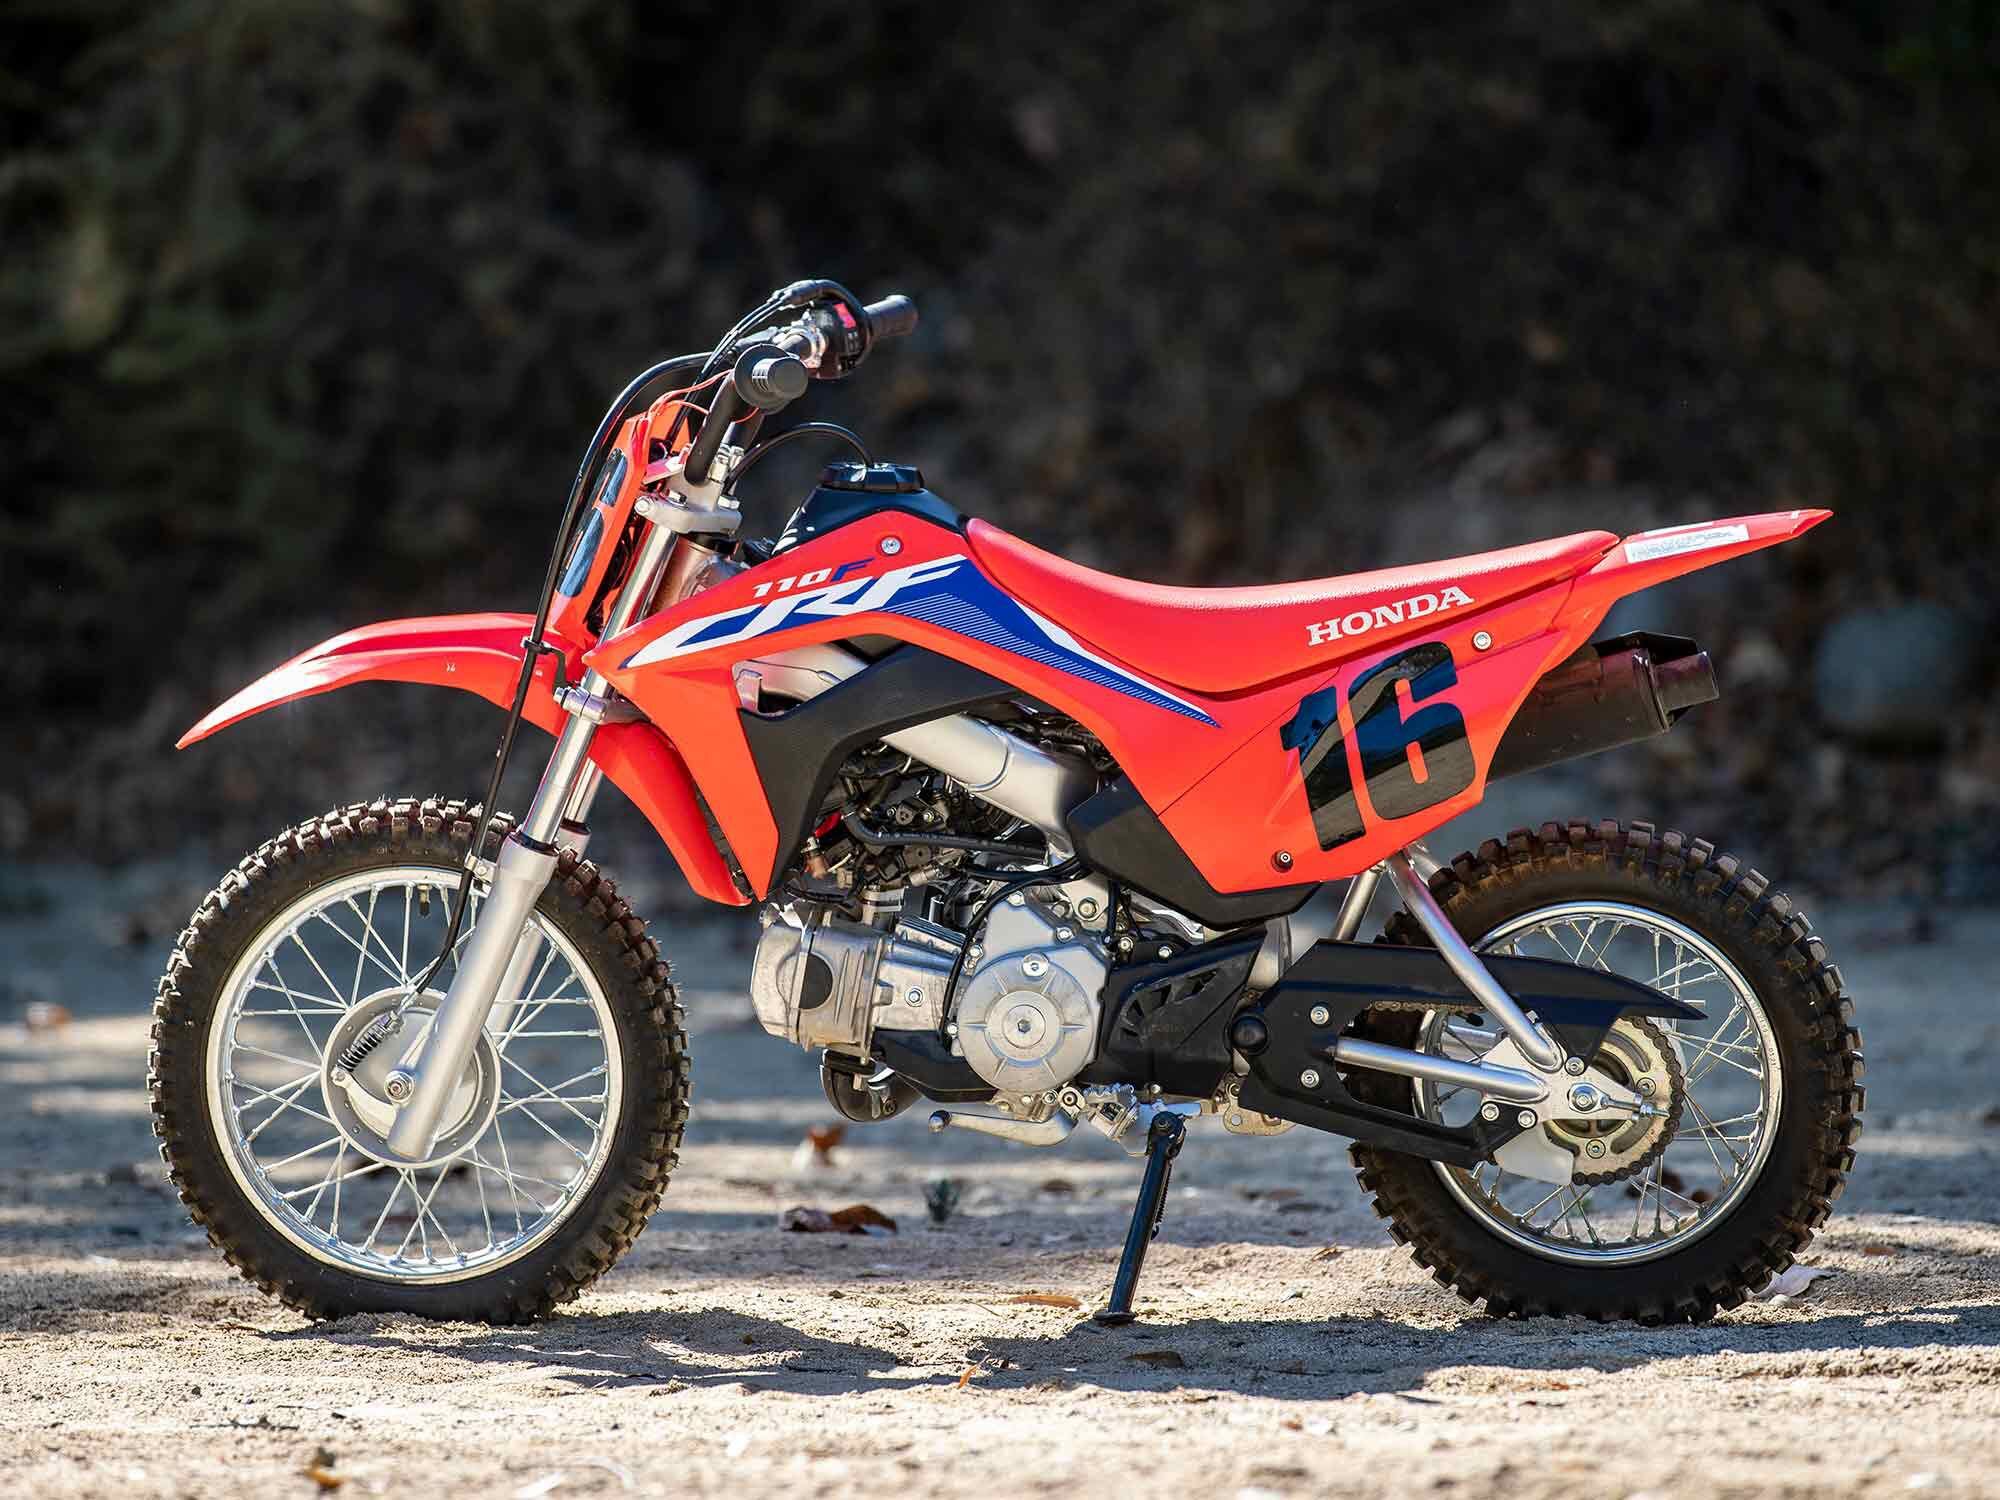 Honda CRF110F is the classic kids bike for moving up the food chain. It features EFI on its 110cc four-stroke single, a four-speed transmission with automatic clutch, drum brakes, and quiet muffler. It is slightly larger and about 60 pounds heavier ready to ride than the CRF-E2.